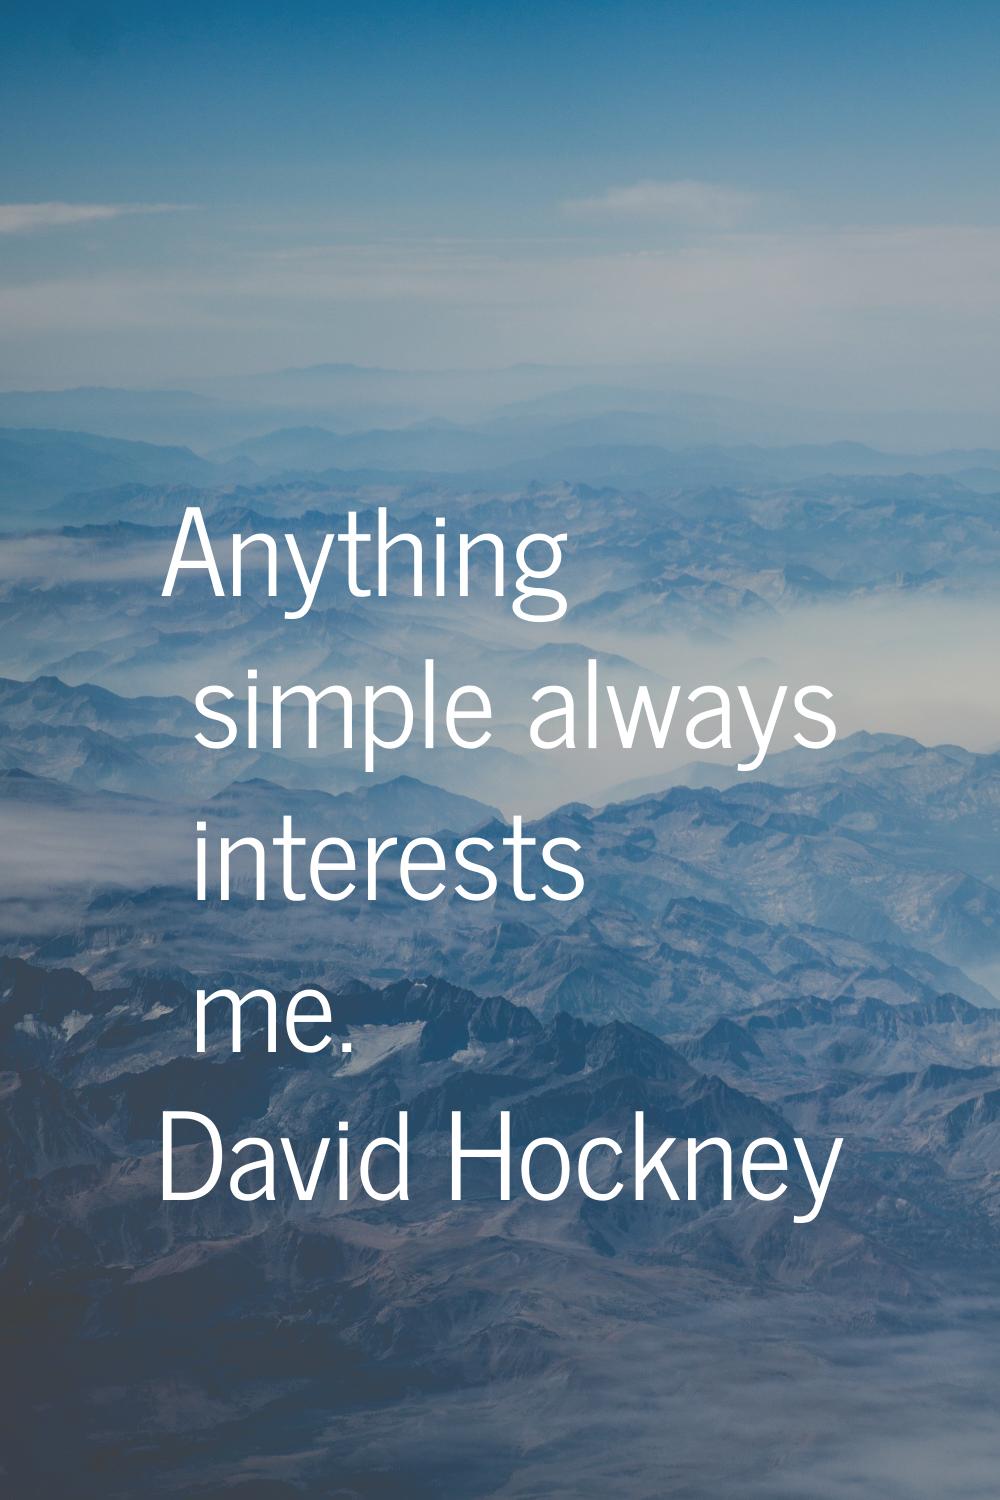 Anything simple always interests me.